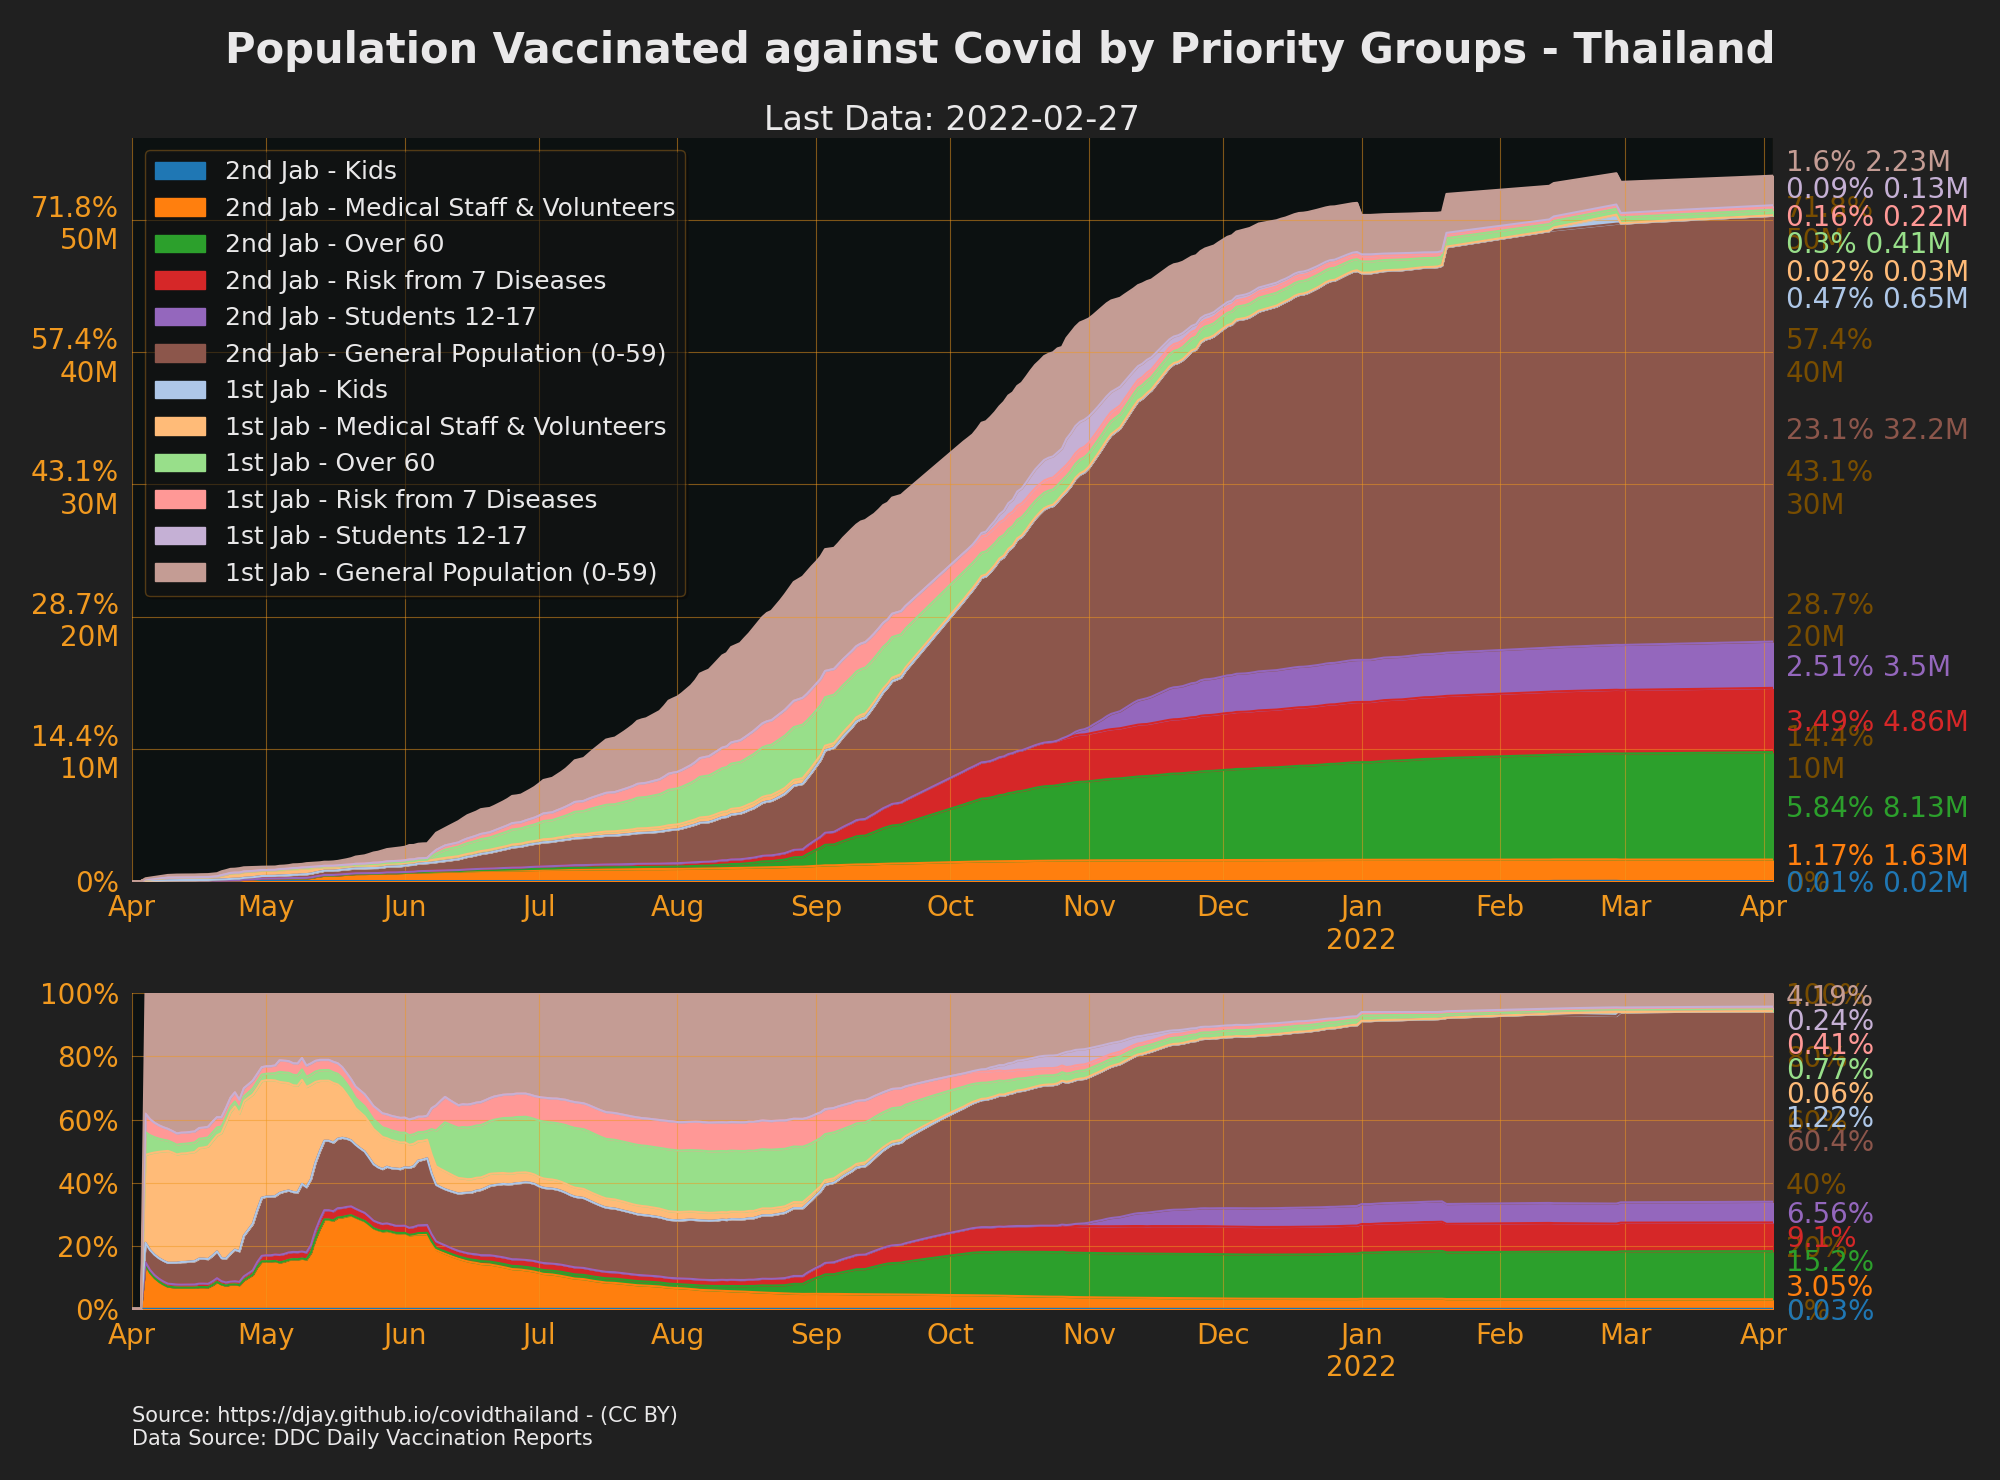 Vaccinations in Thailand